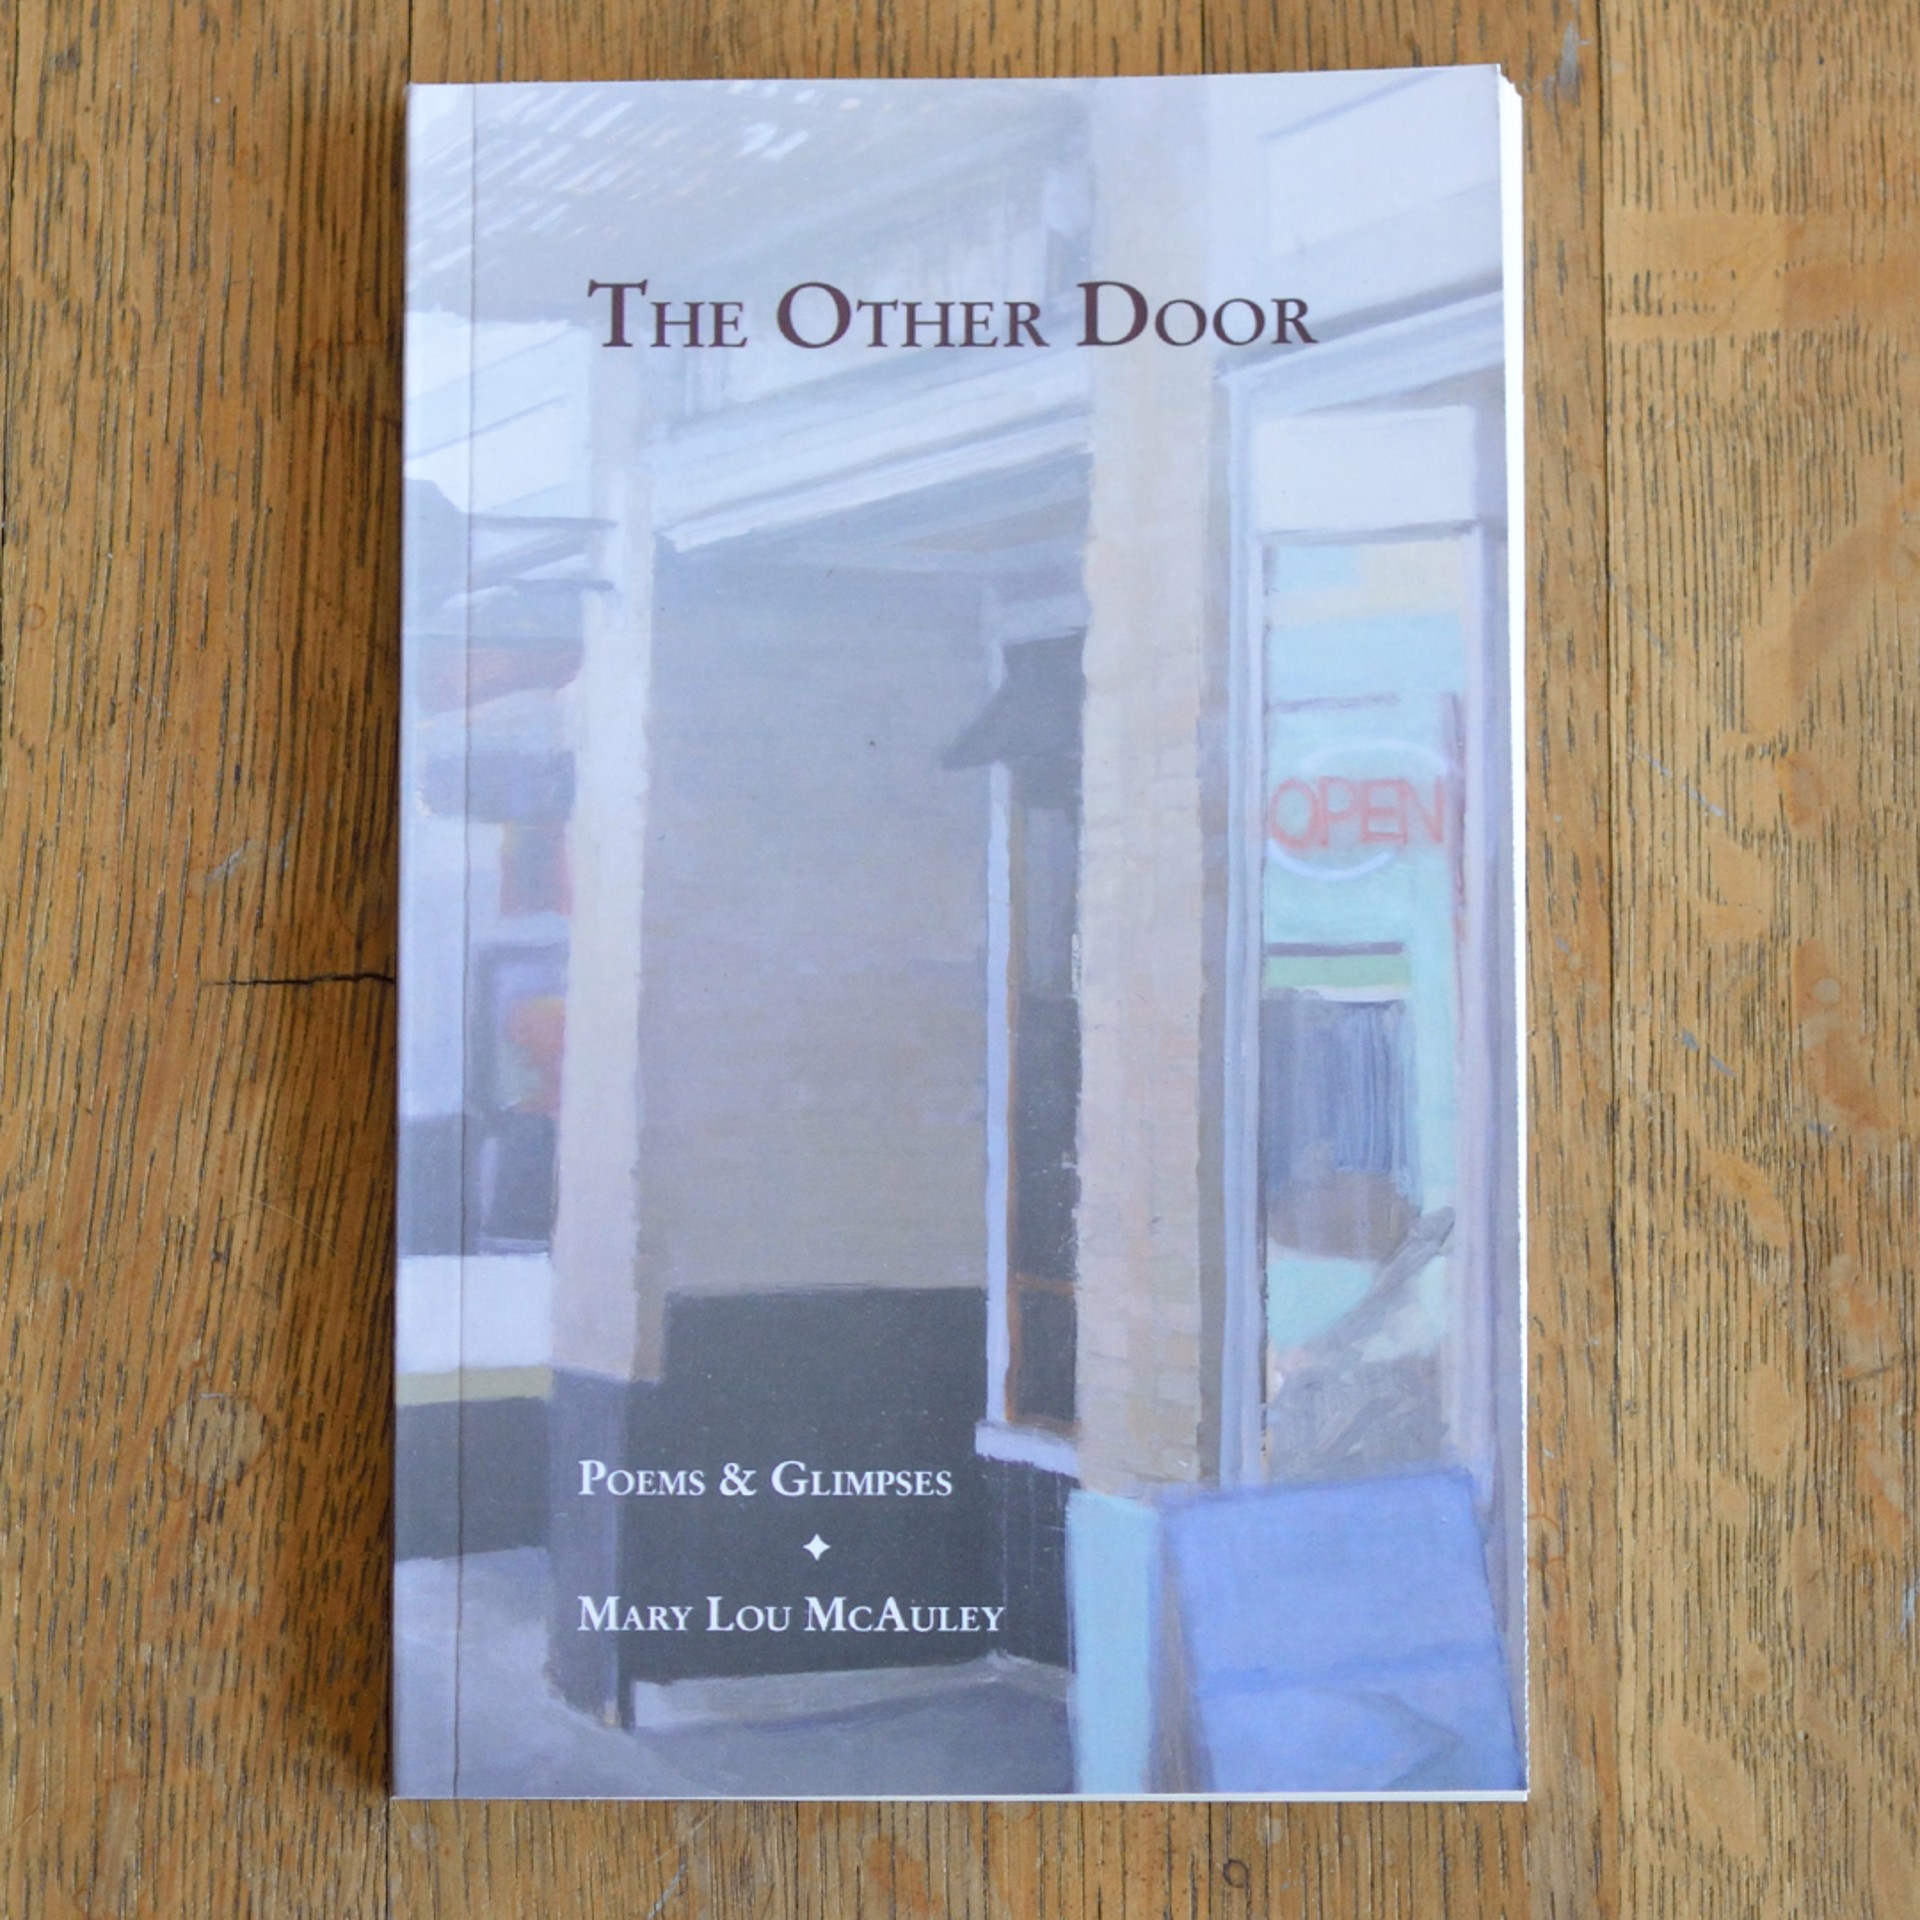 The Other Door by Mary Lou McAuley